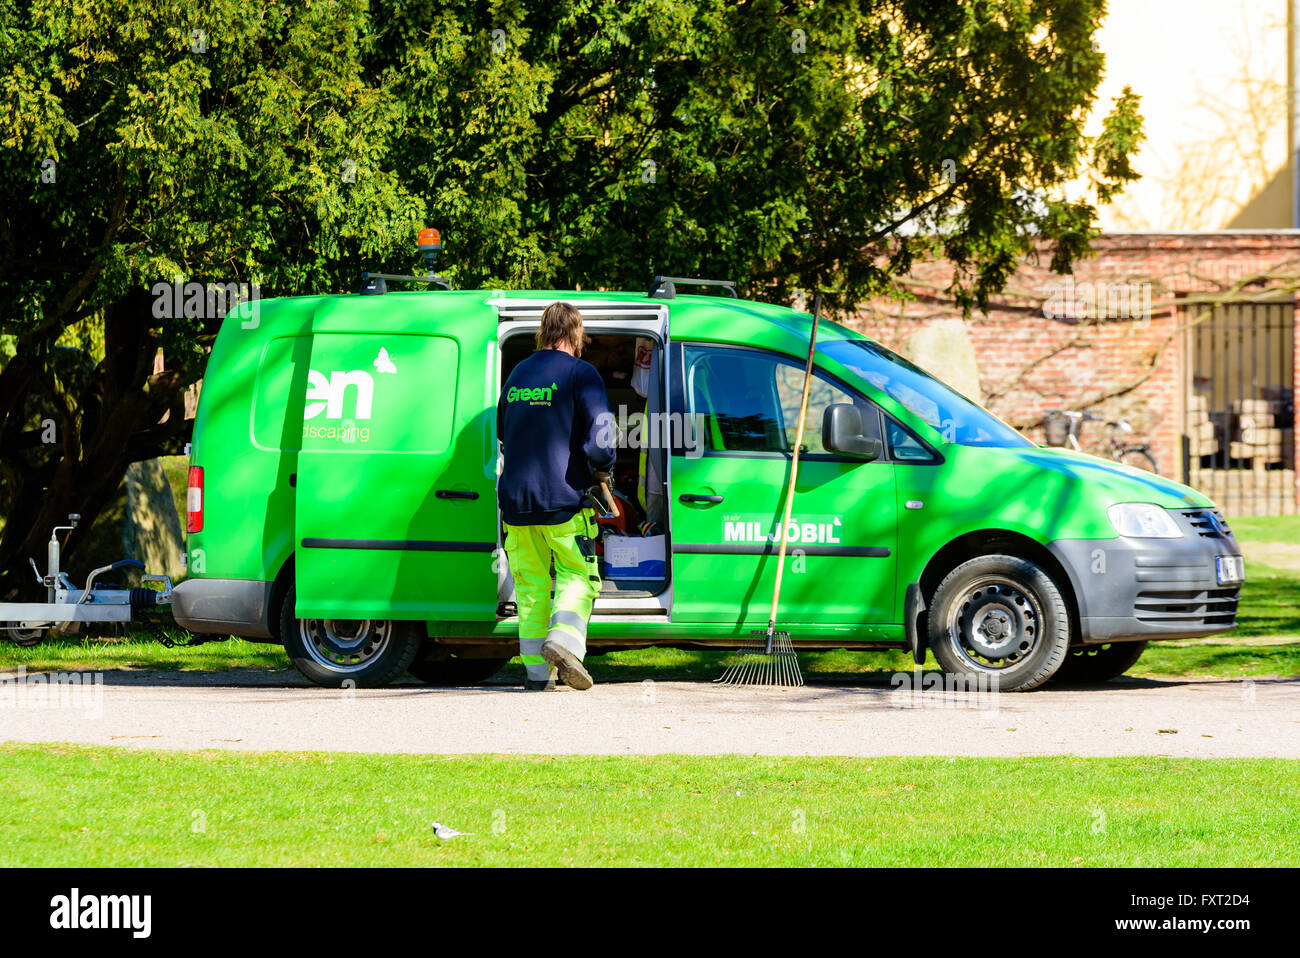 Lund, Sweden - April 11, 2016: Everyday life in the city. Green landscaping is out with their green eco car doing a job in town. Stock Photo